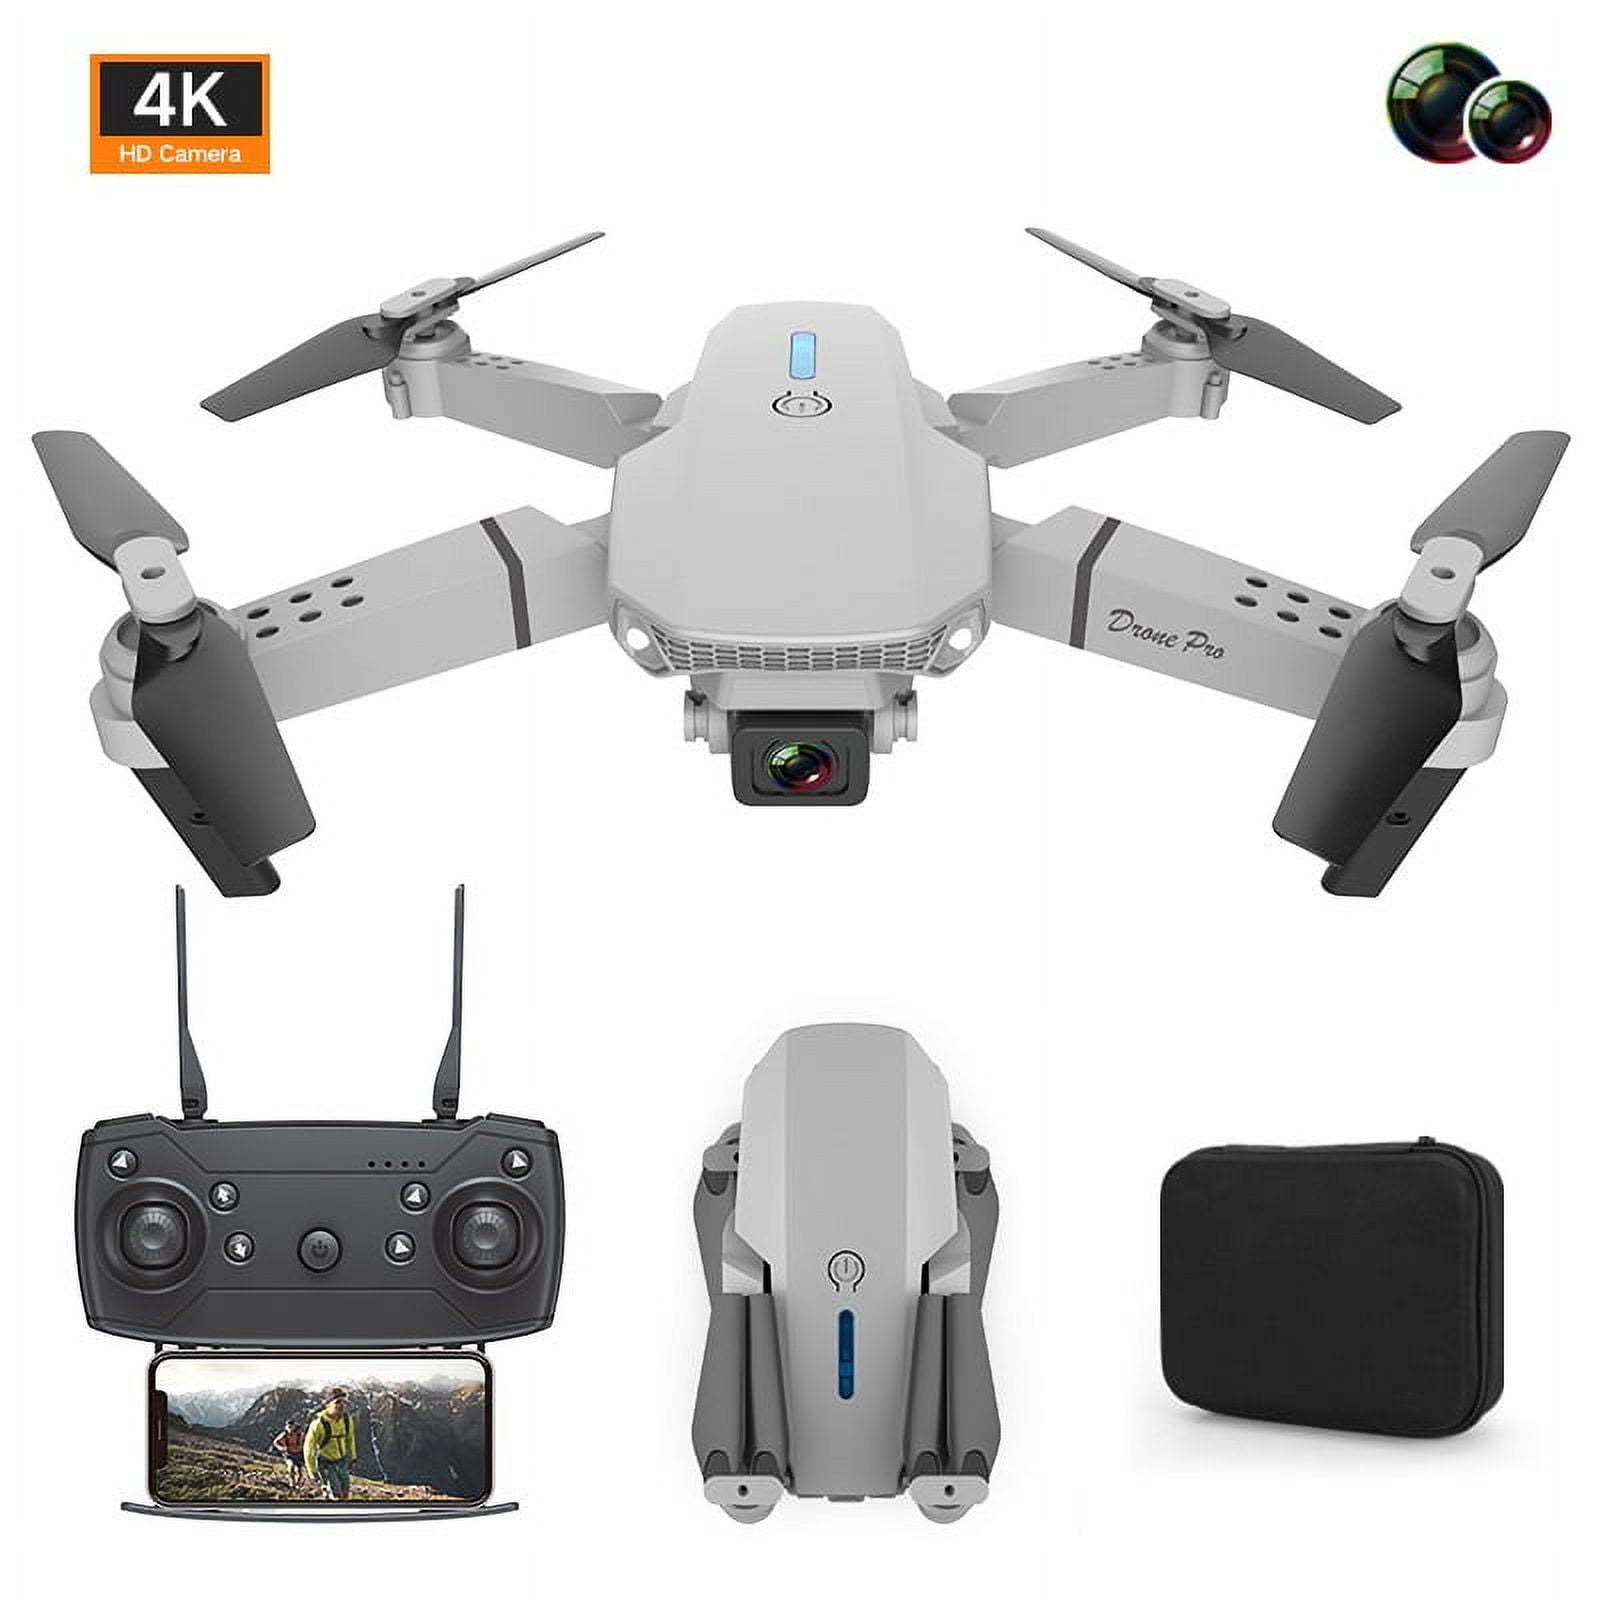  DJI Air 2S Drone Quadcopter with 4K & 5.4K Video, 1 CMOS  Sensor, 3-Axis Gimbal Camera, Content Creator Bundle with Deco Gear  Backpack, Landing Pad, Software and Accessories : Electronics